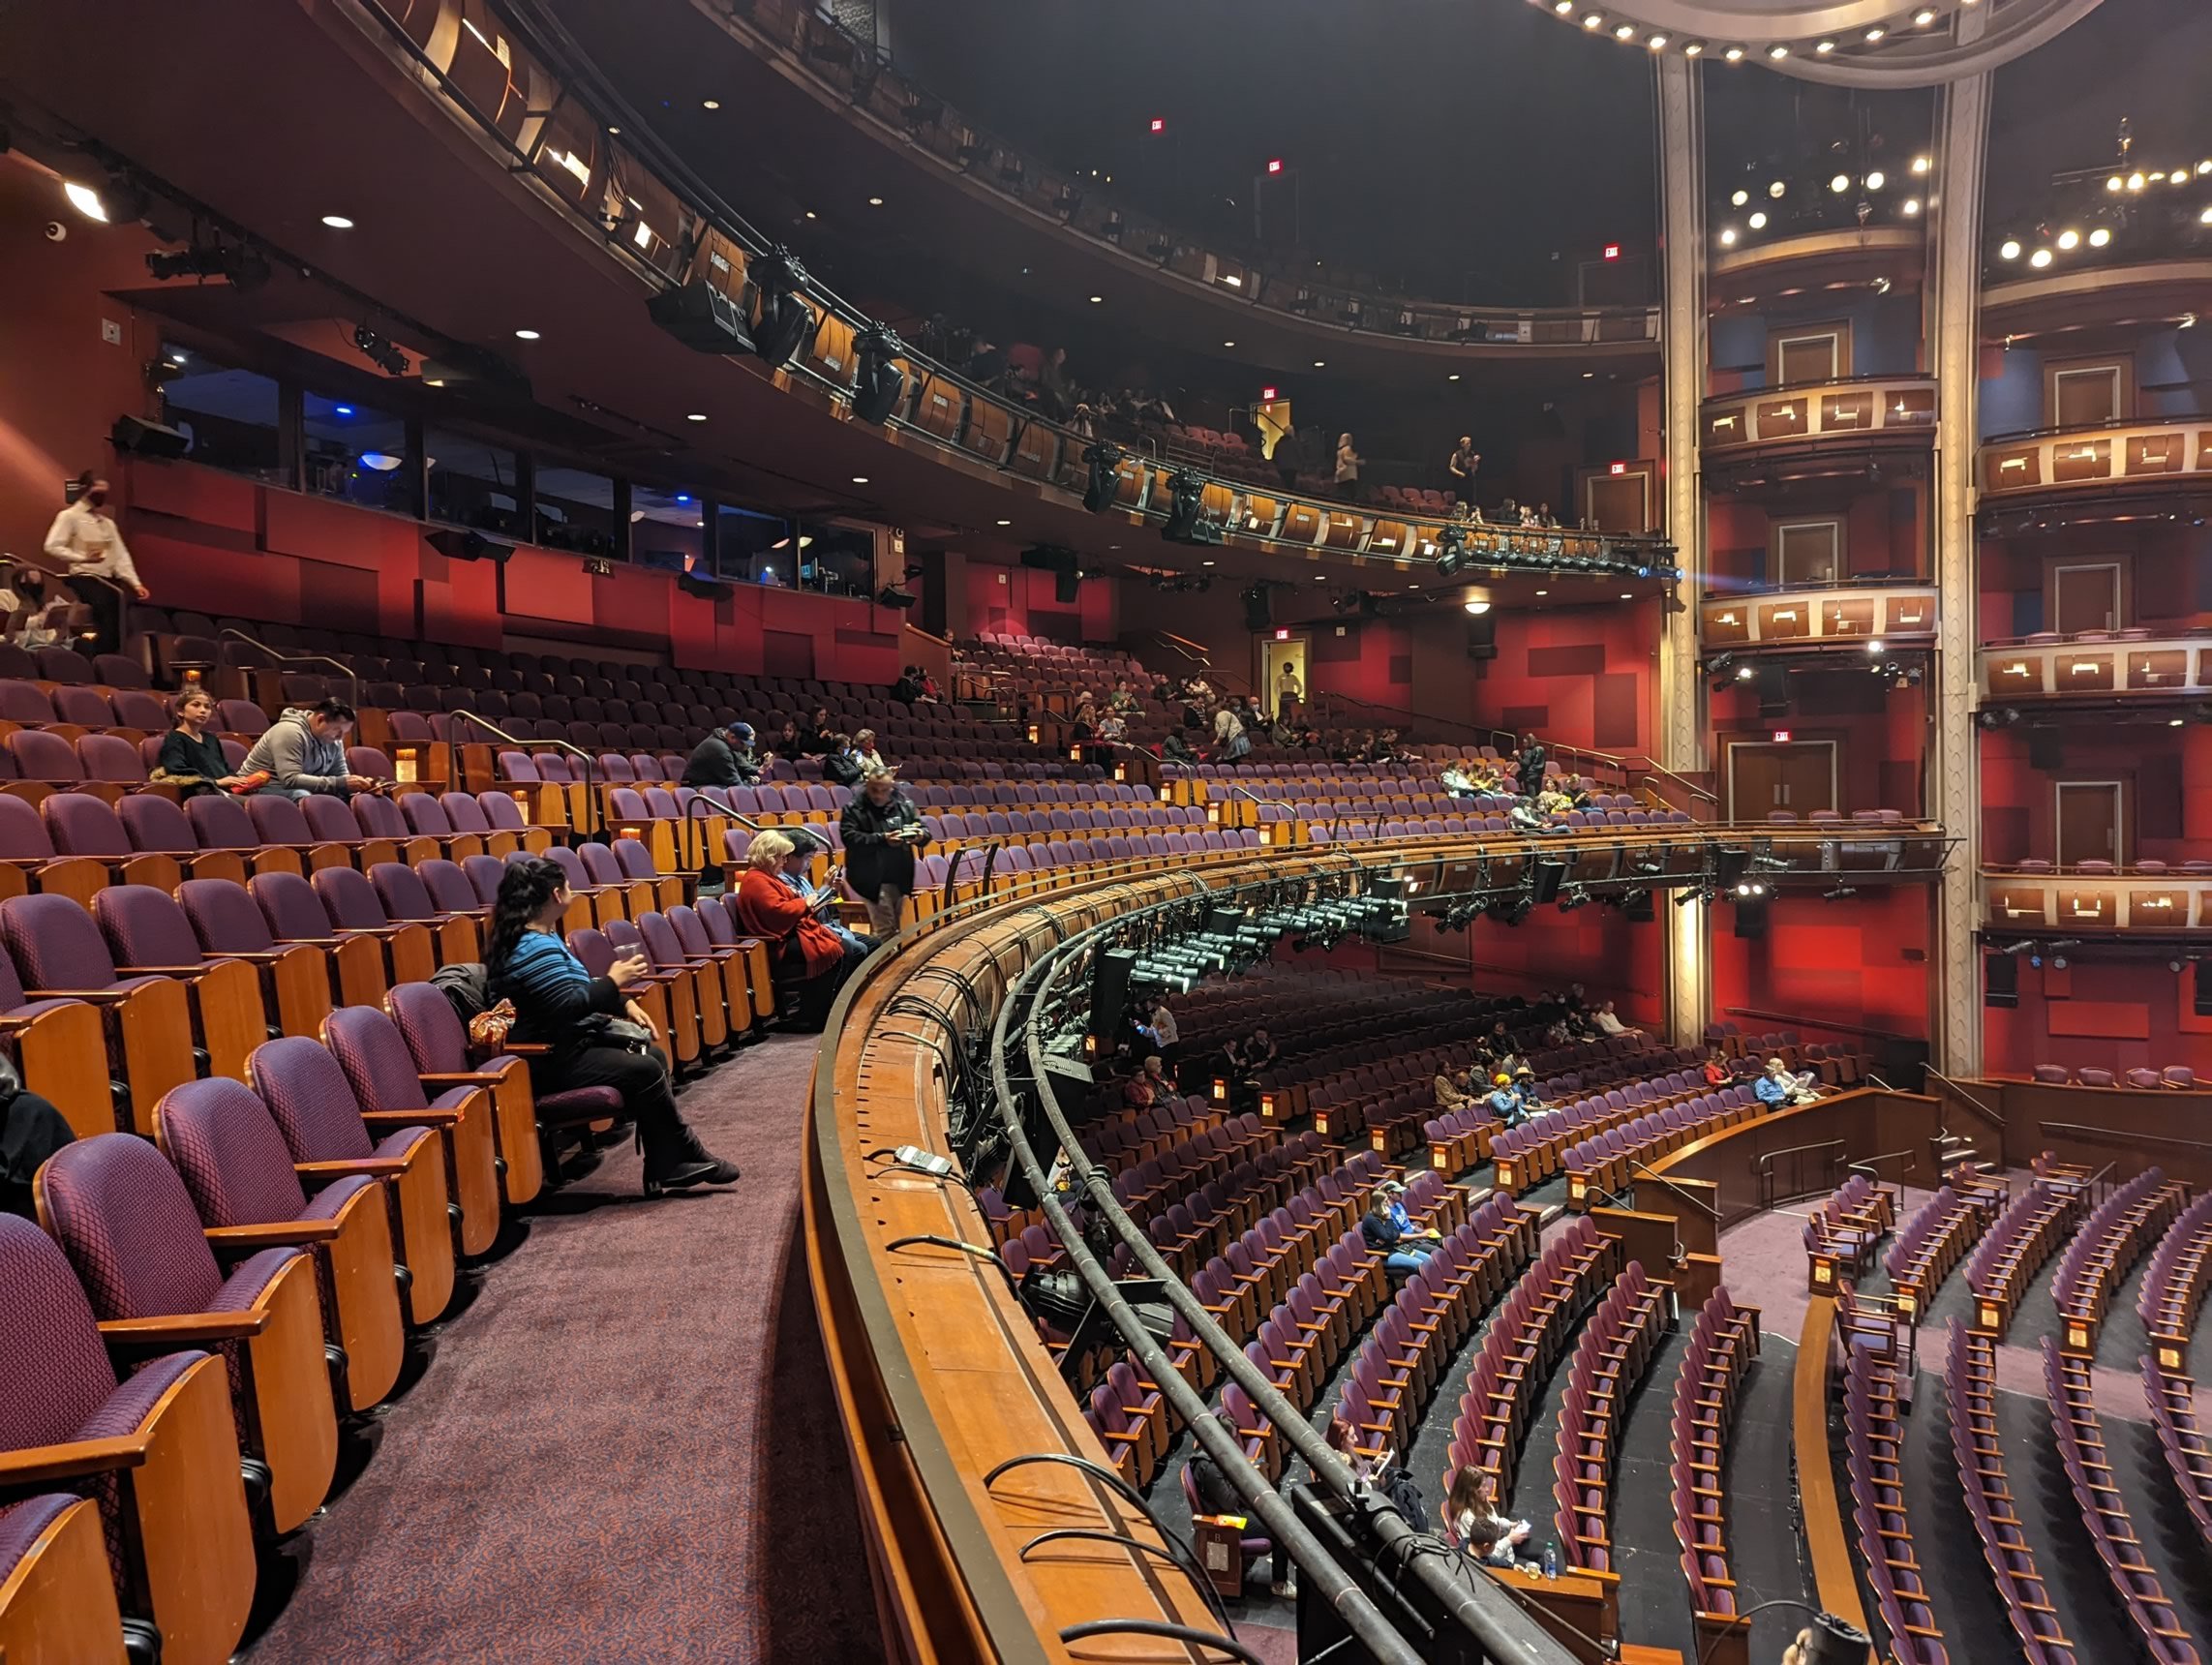 Dolby Theater Concert Seating Chart | Cabinets Matttroy